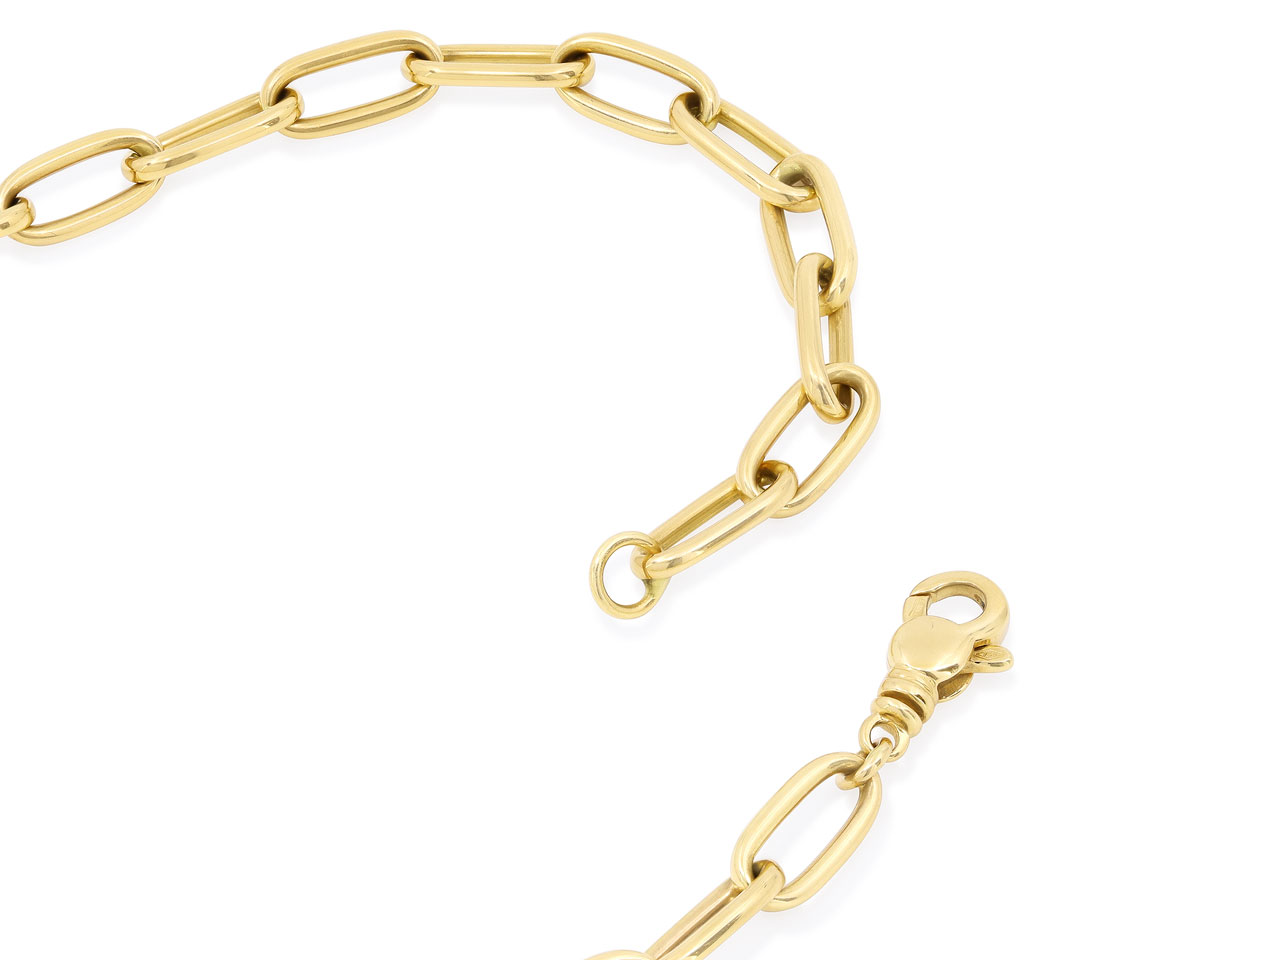 Italian Oval Link Gold Chain in 18K Gold, by Beladora